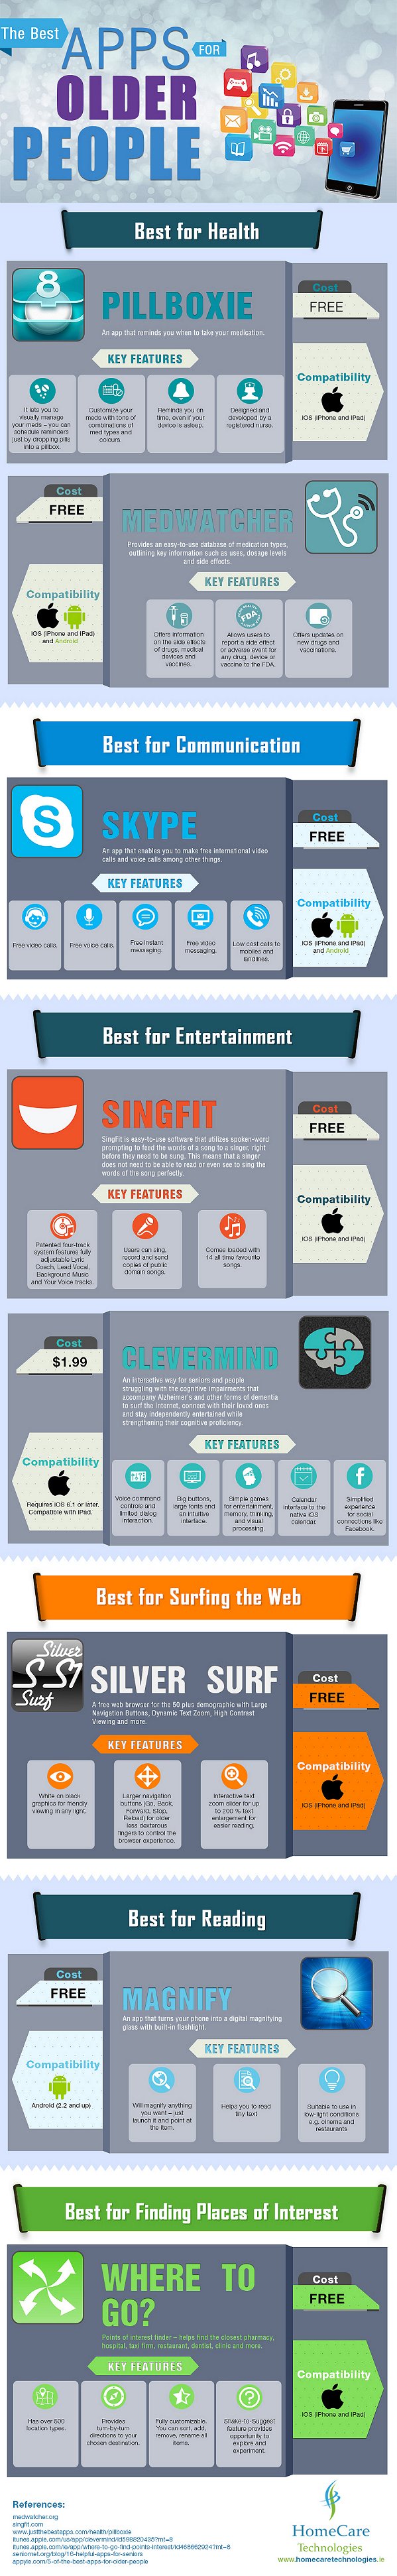 apps-for-older-people-infographic